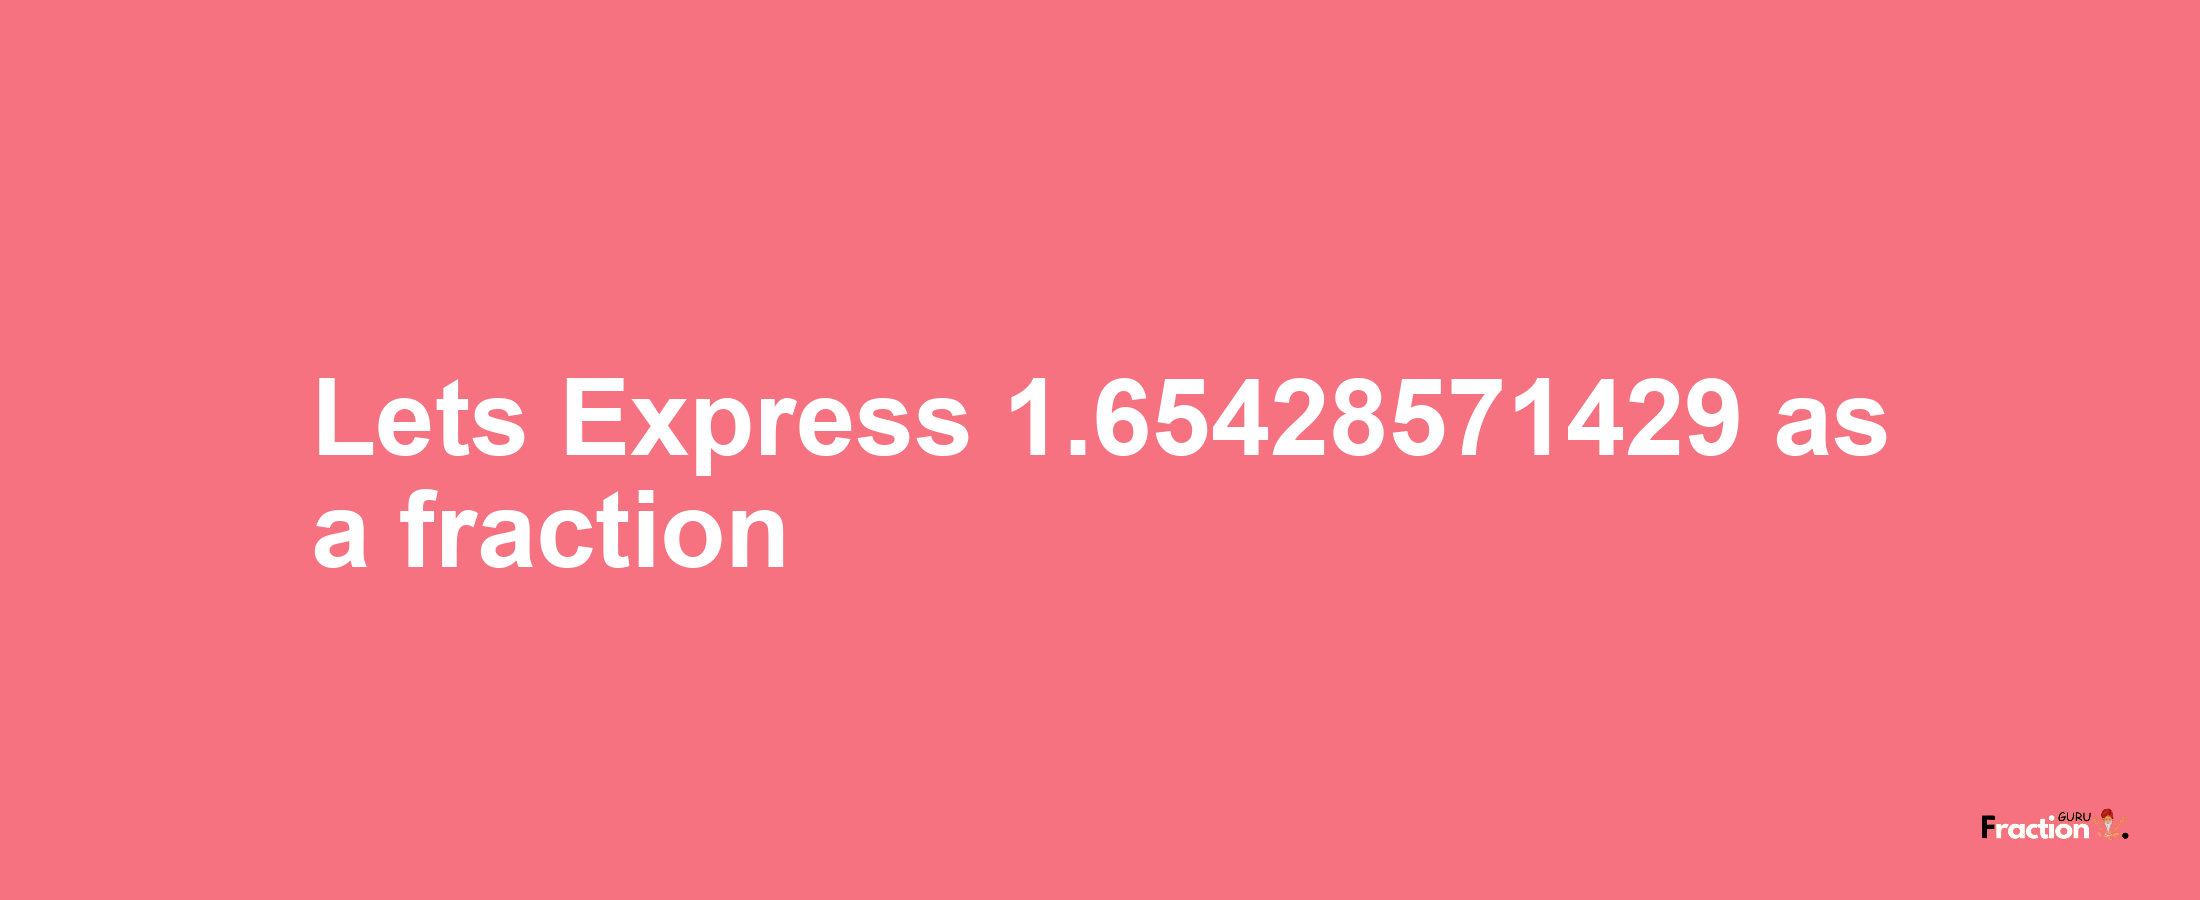 Lets Express 1.65428571429 as afraction